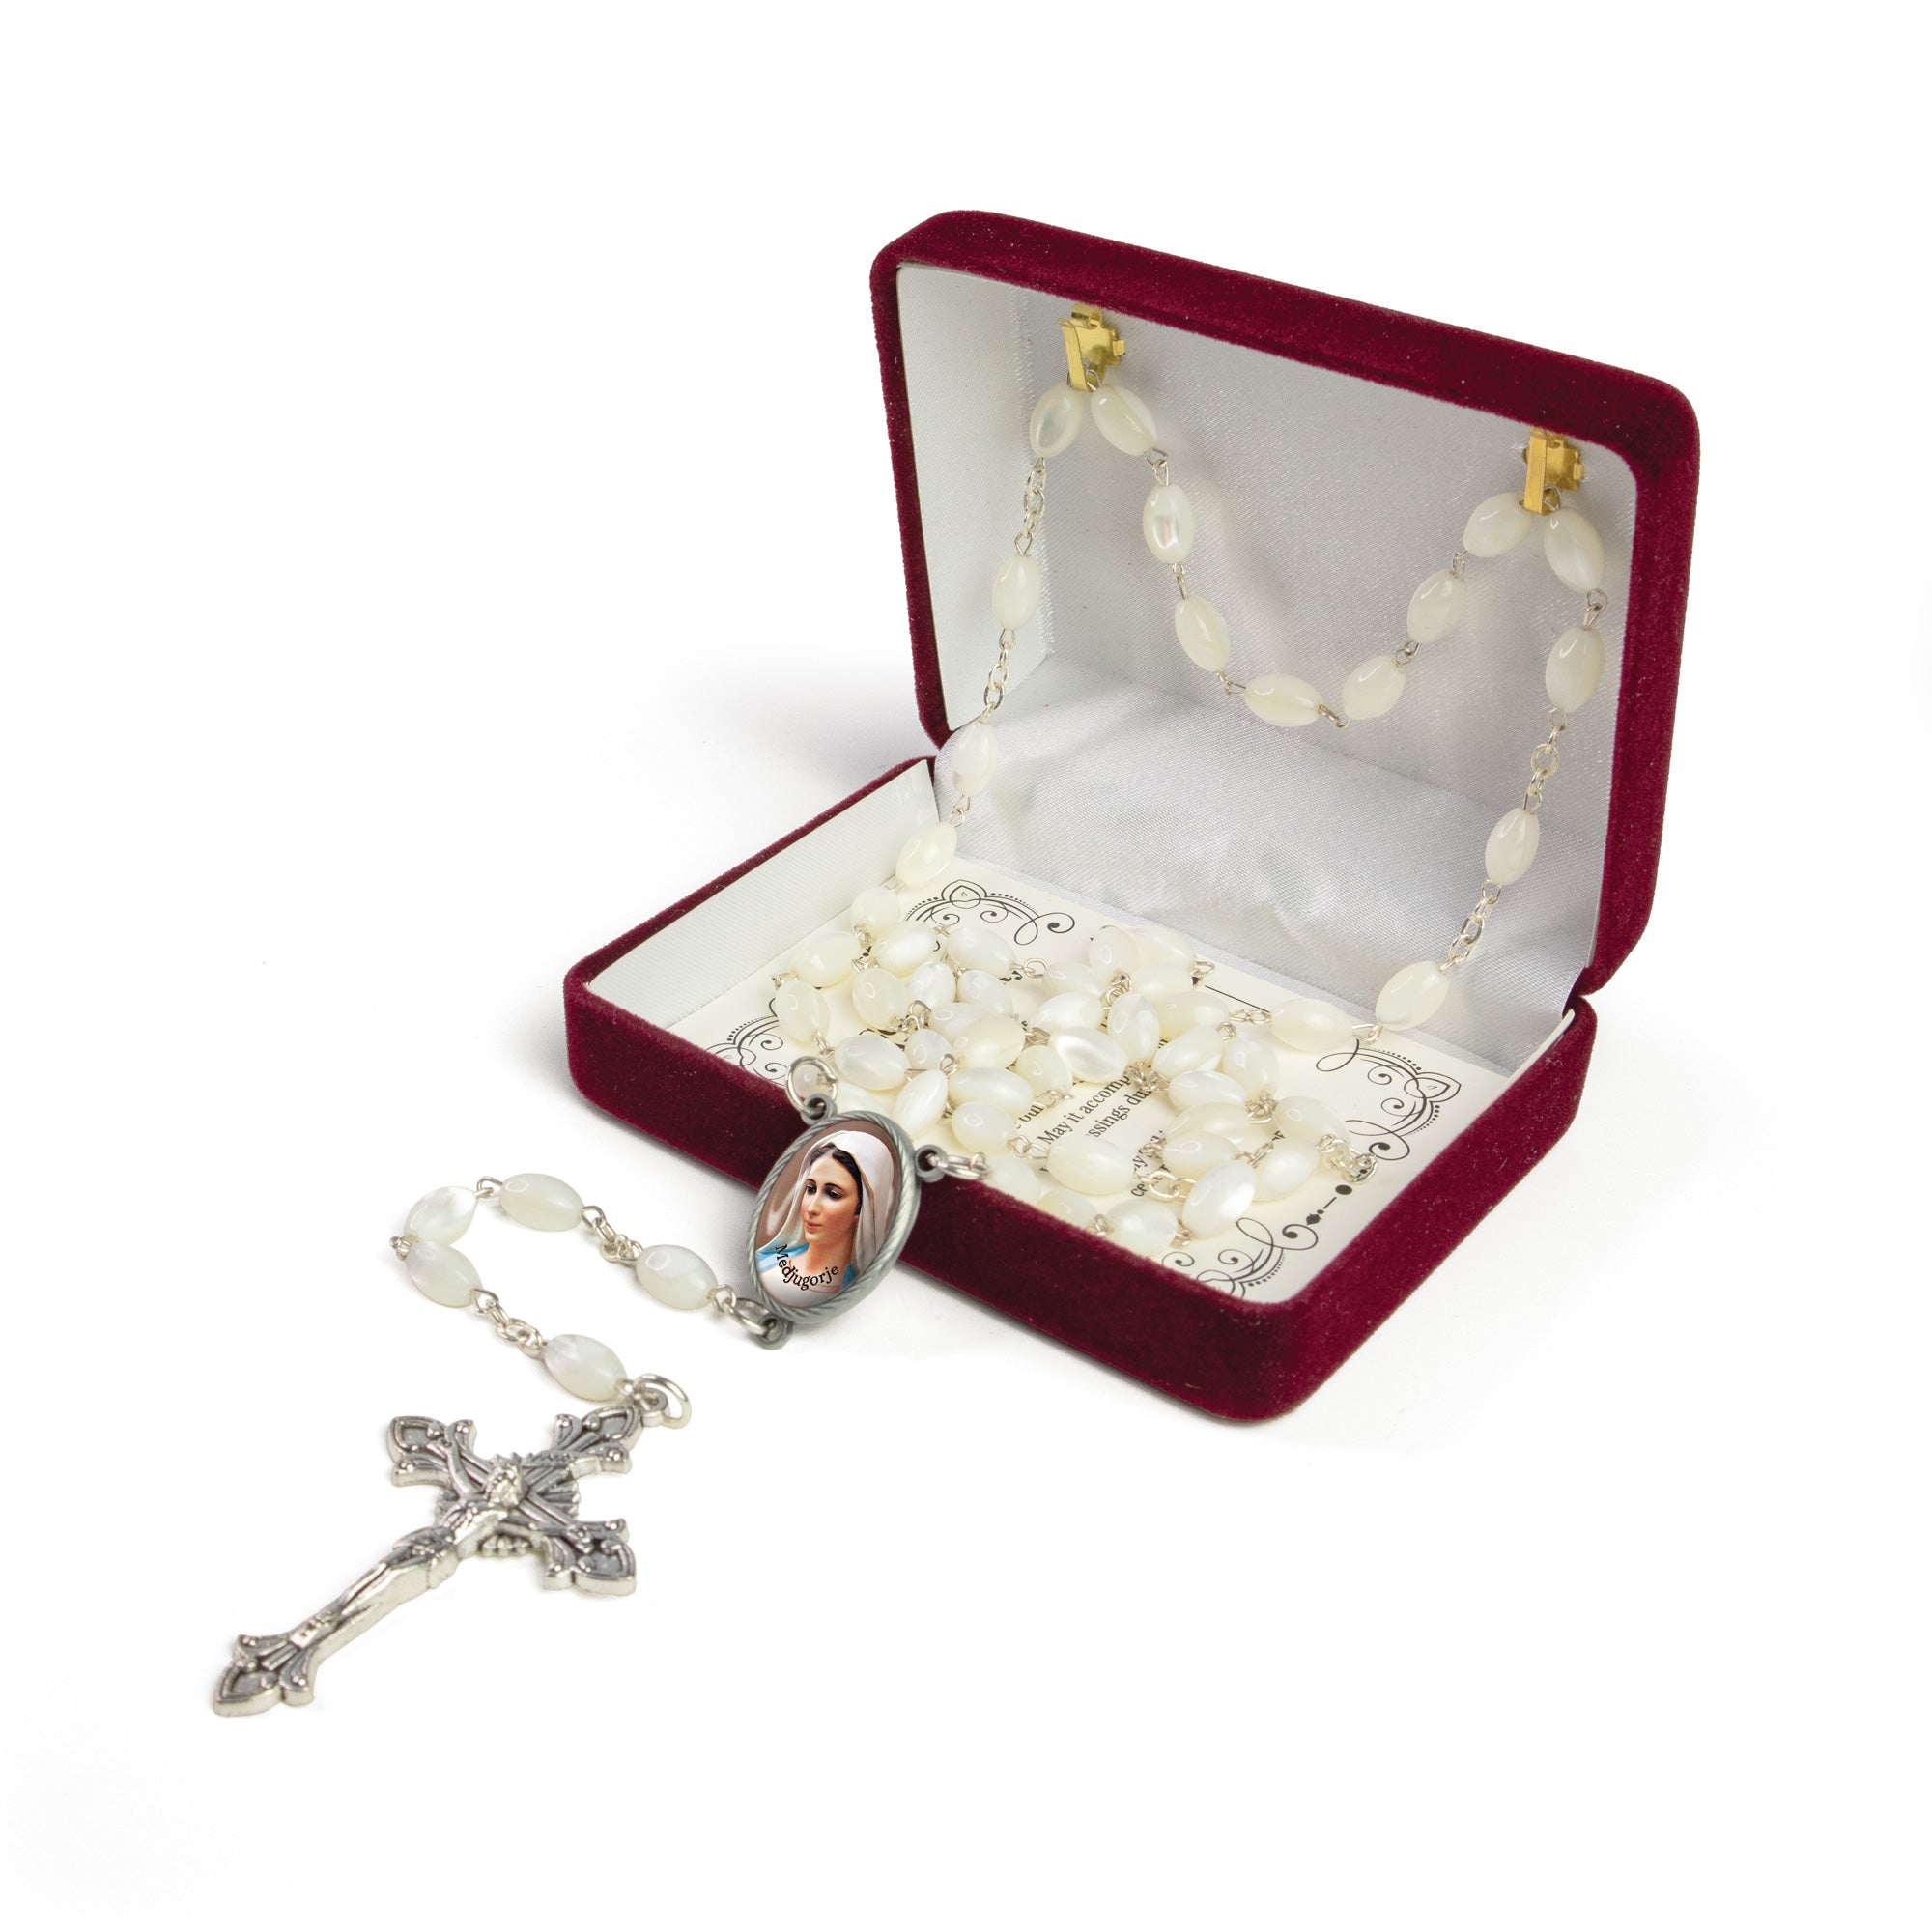 Mother of Pearl Catholic Rosary, Virgin Mary Medjugorje Medal